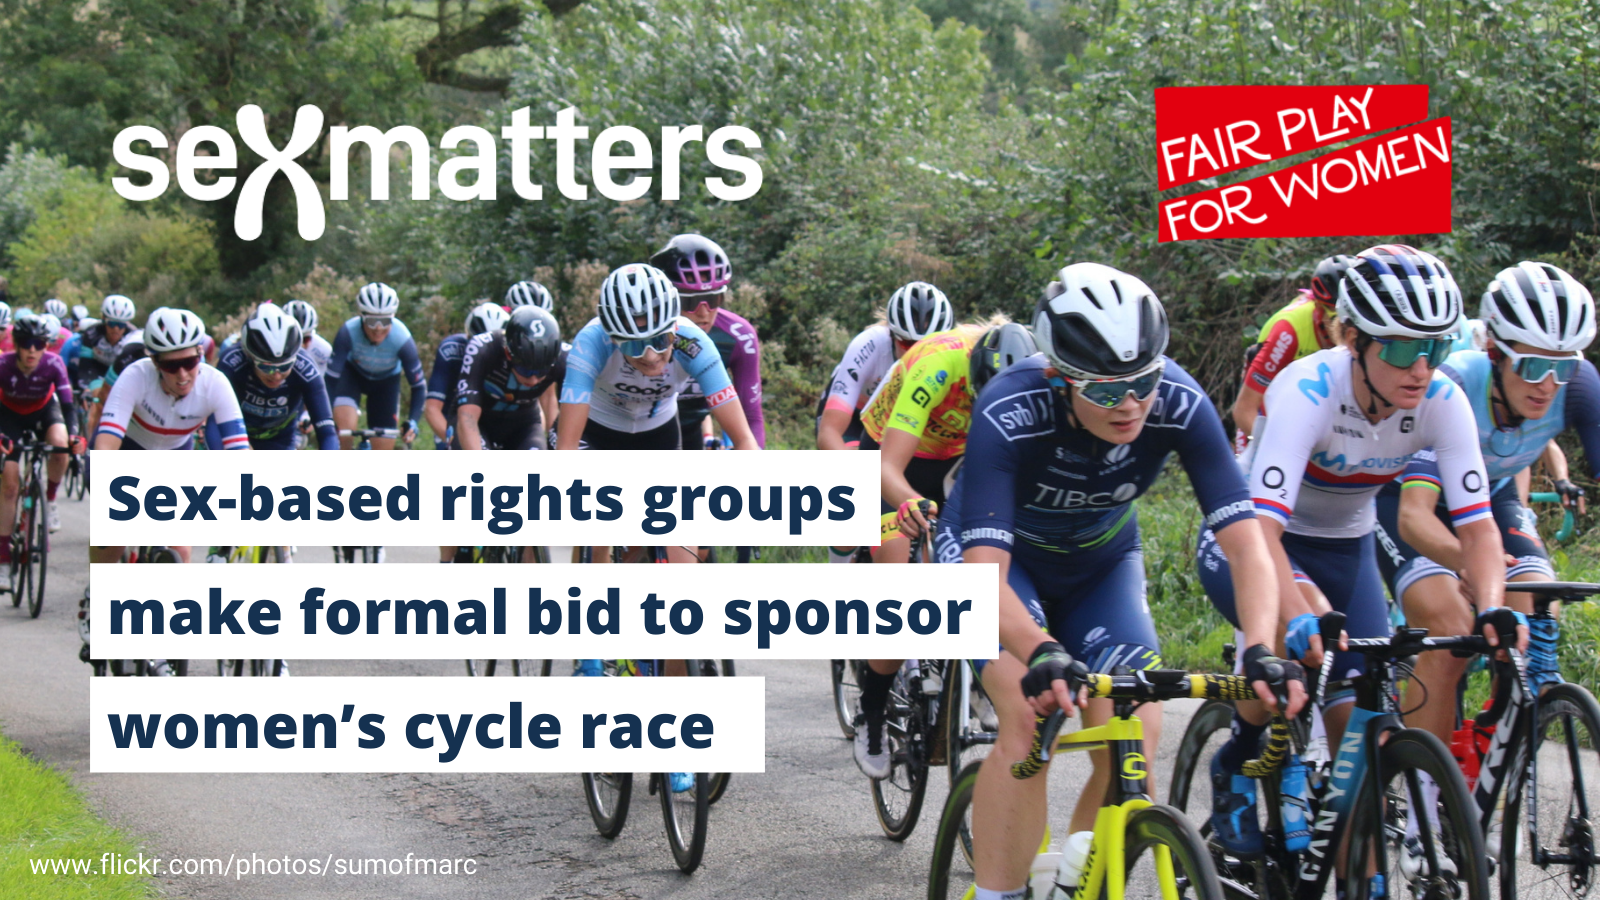 Sex-based rights groups make formal bid to sponsor women’s cycle race